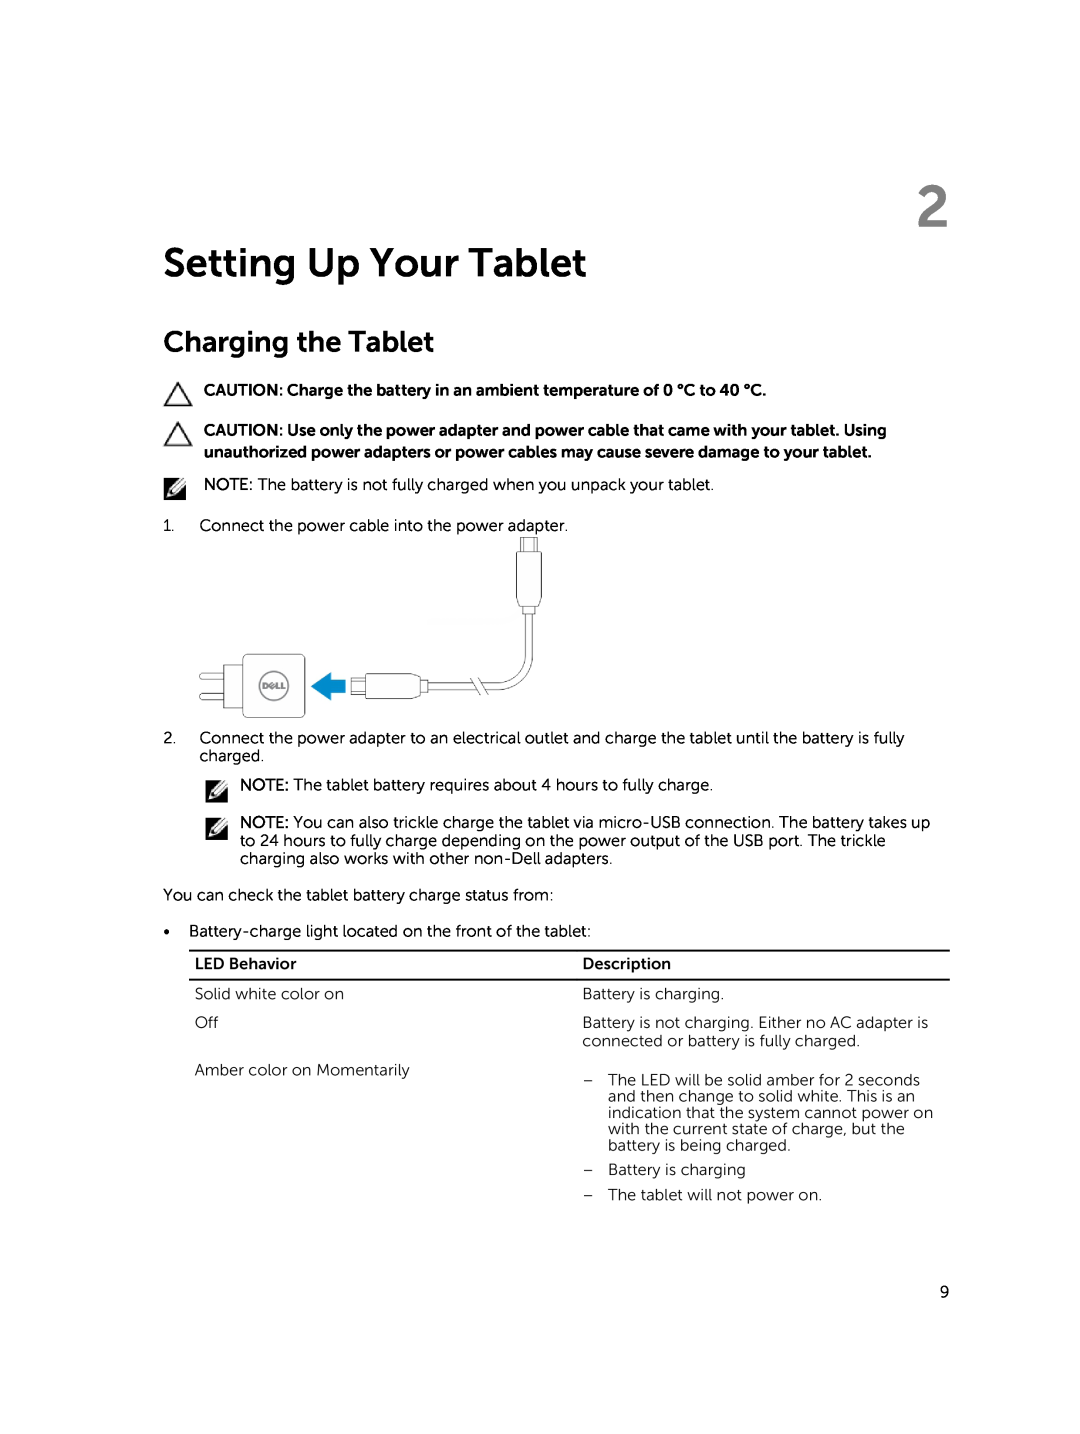 Dell PRO11I6363BLK, T07G manual Setting Up Your Tablet, Charging the Tablet 